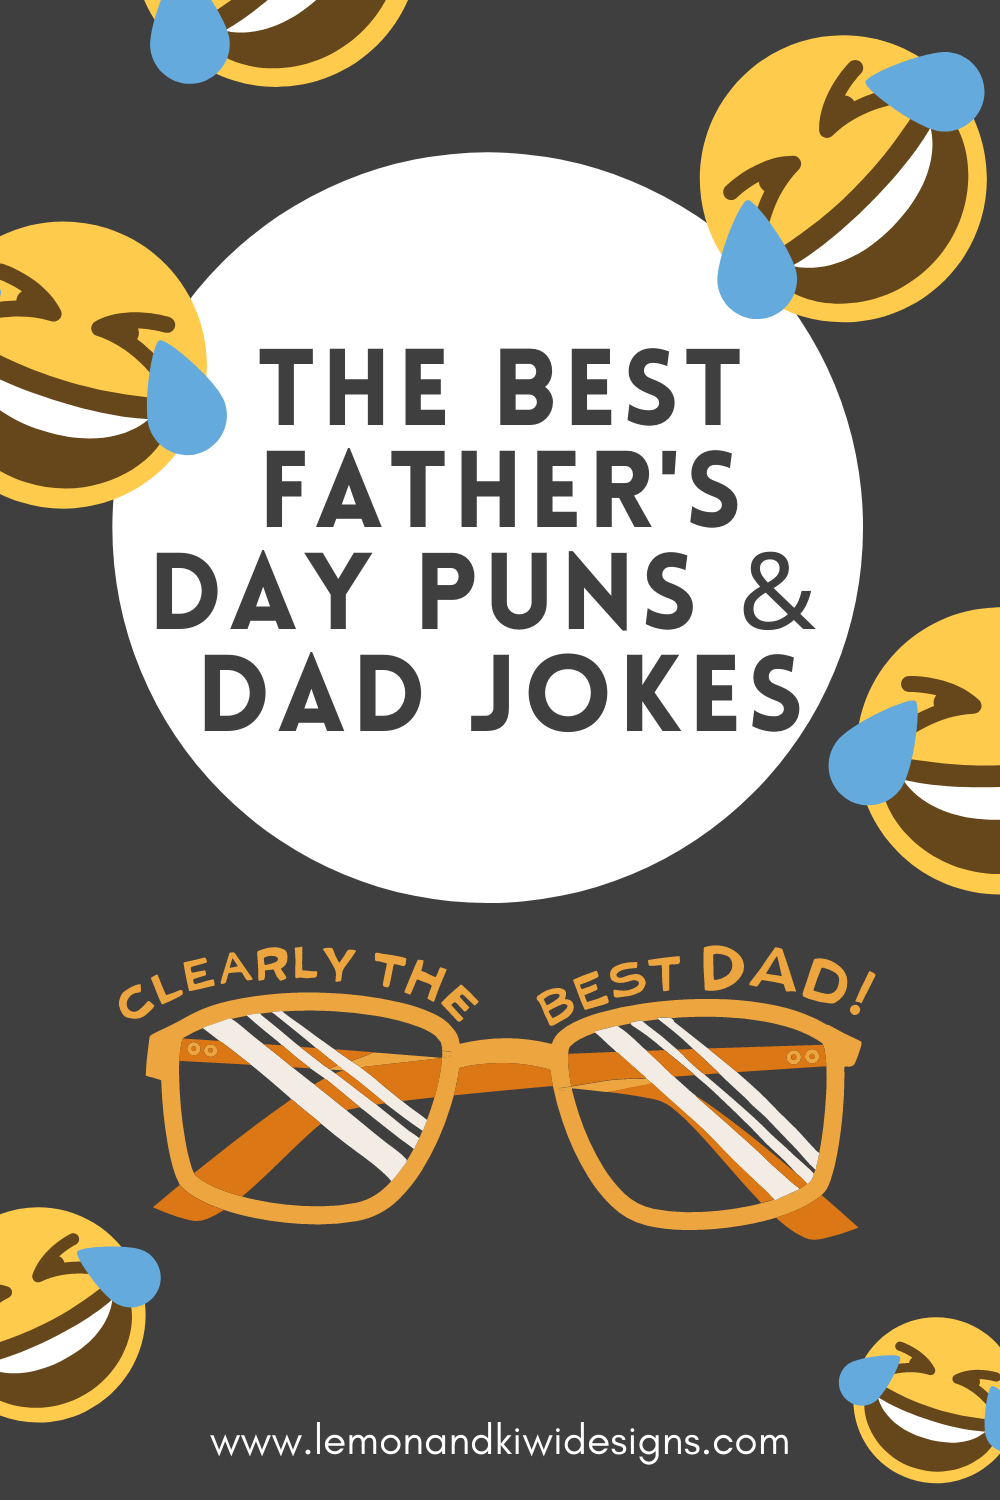 Hilarious Dad Jokes for Father’s Day